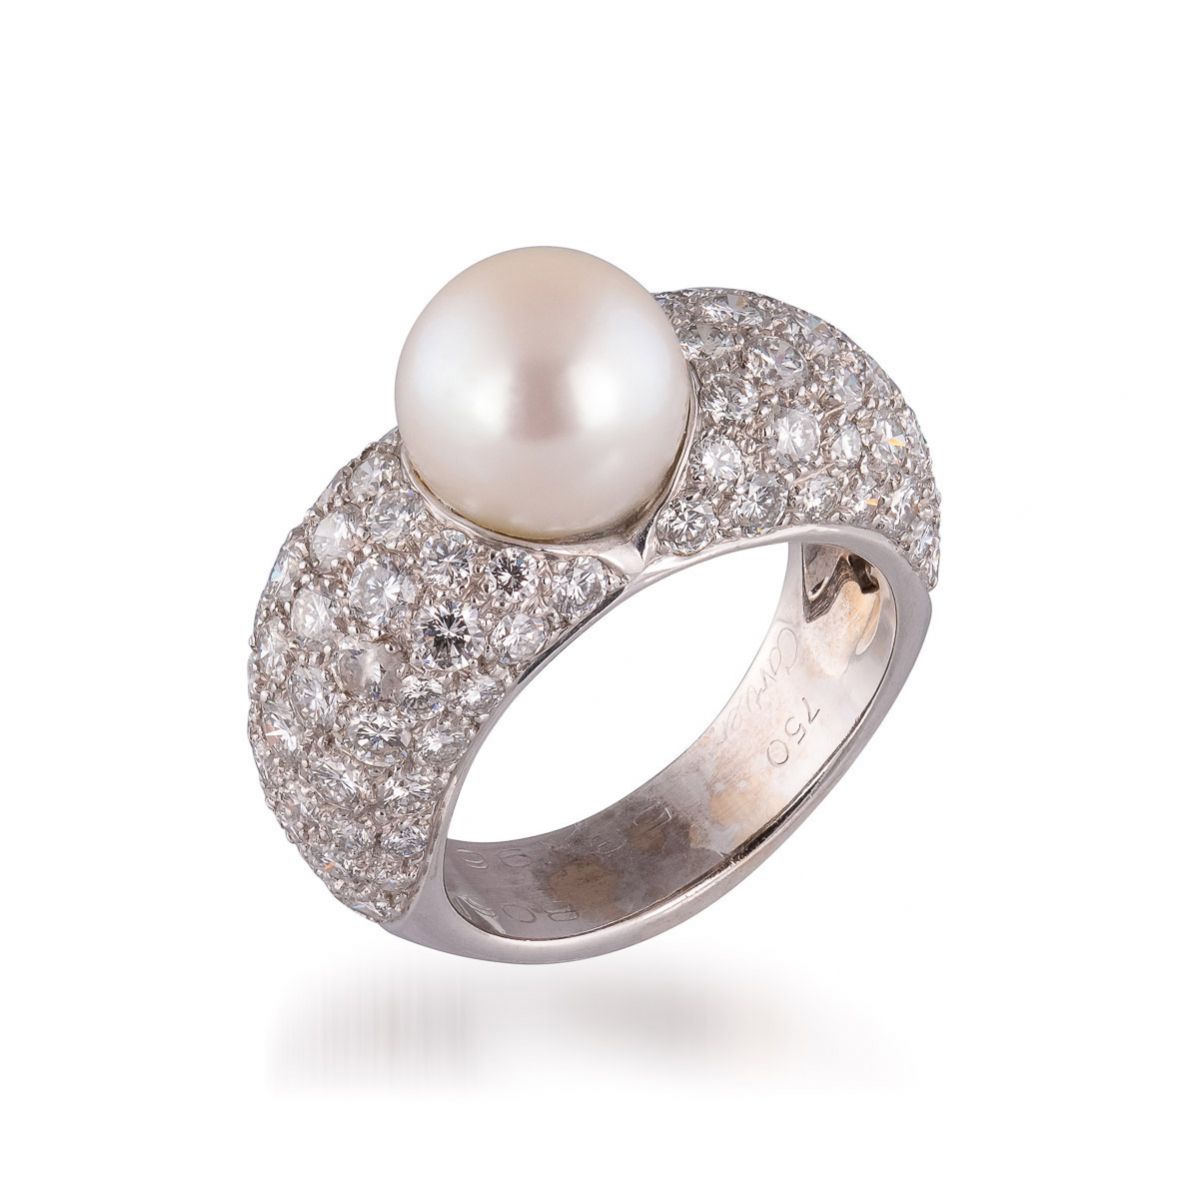 Ring-in-18k-gold-with-diamonds-and-pearlsCARTIER